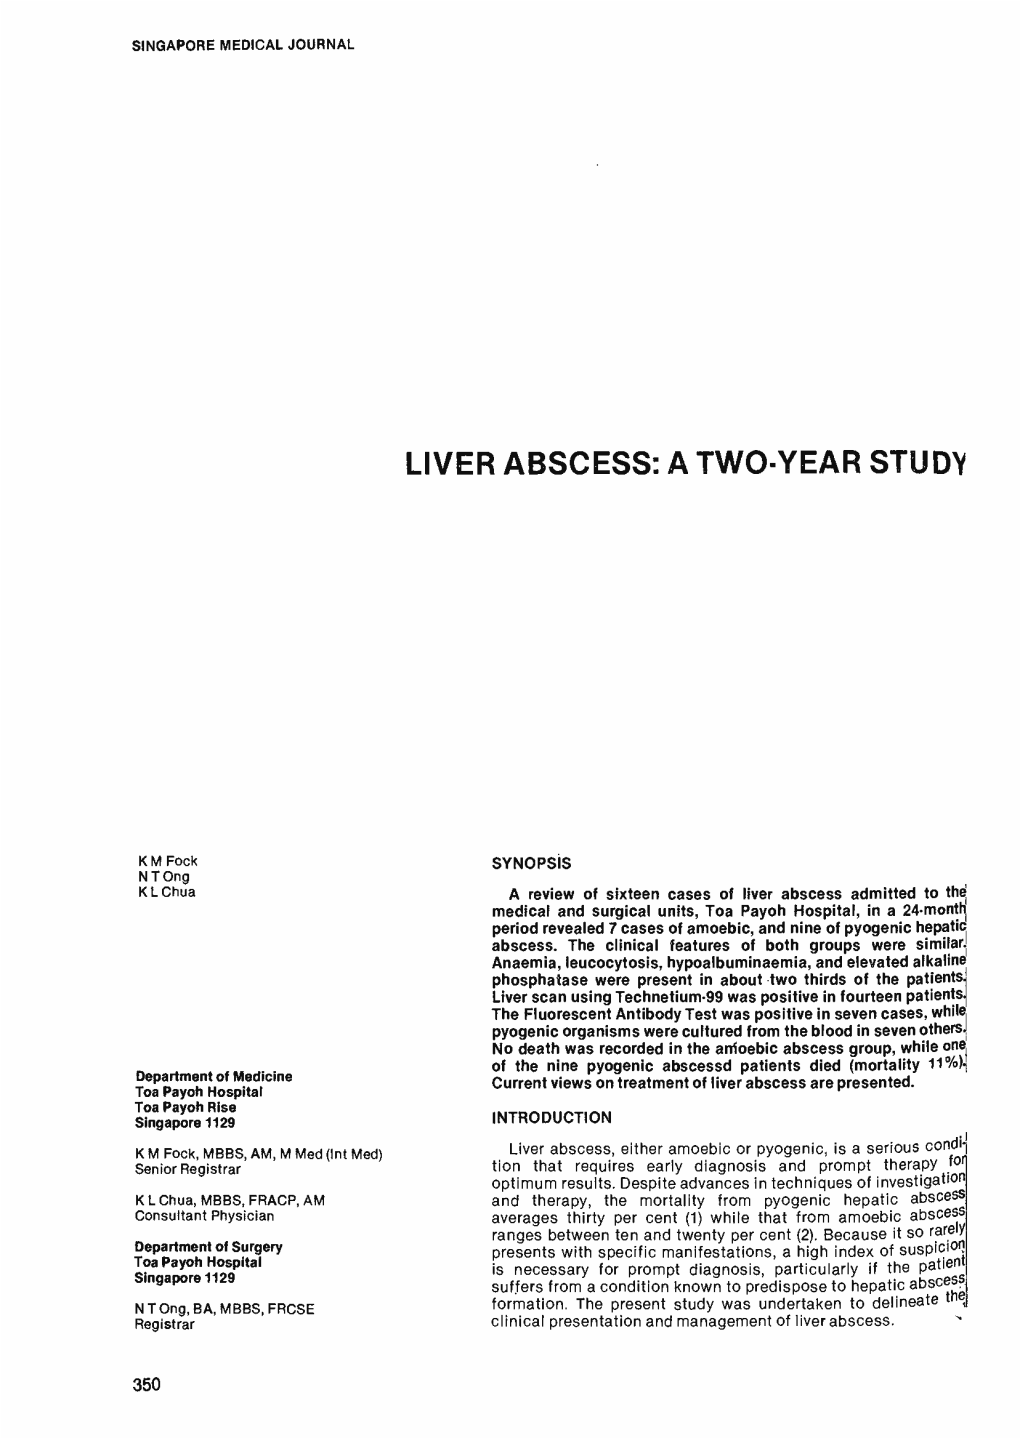 Liver Abscess: a Two-Year Study